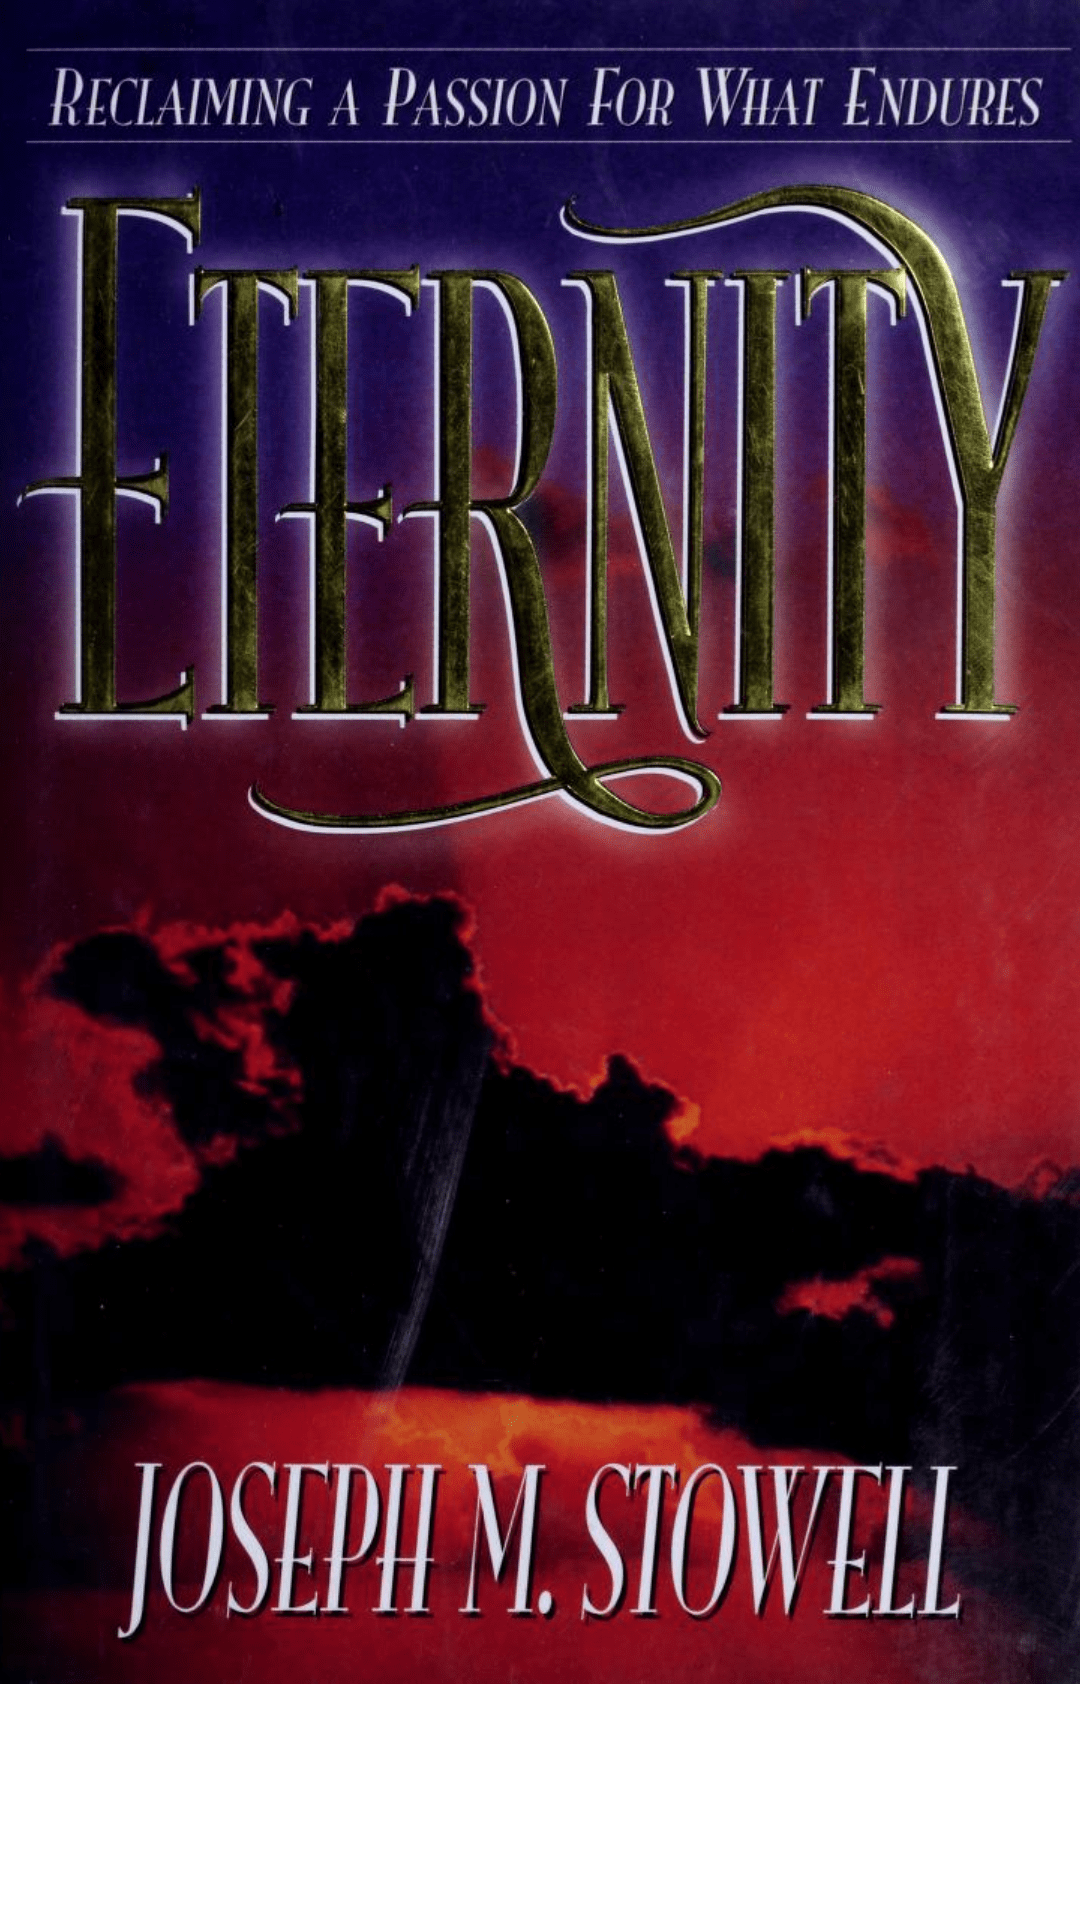 Eternity : Reclaiming a Passion for What Endures